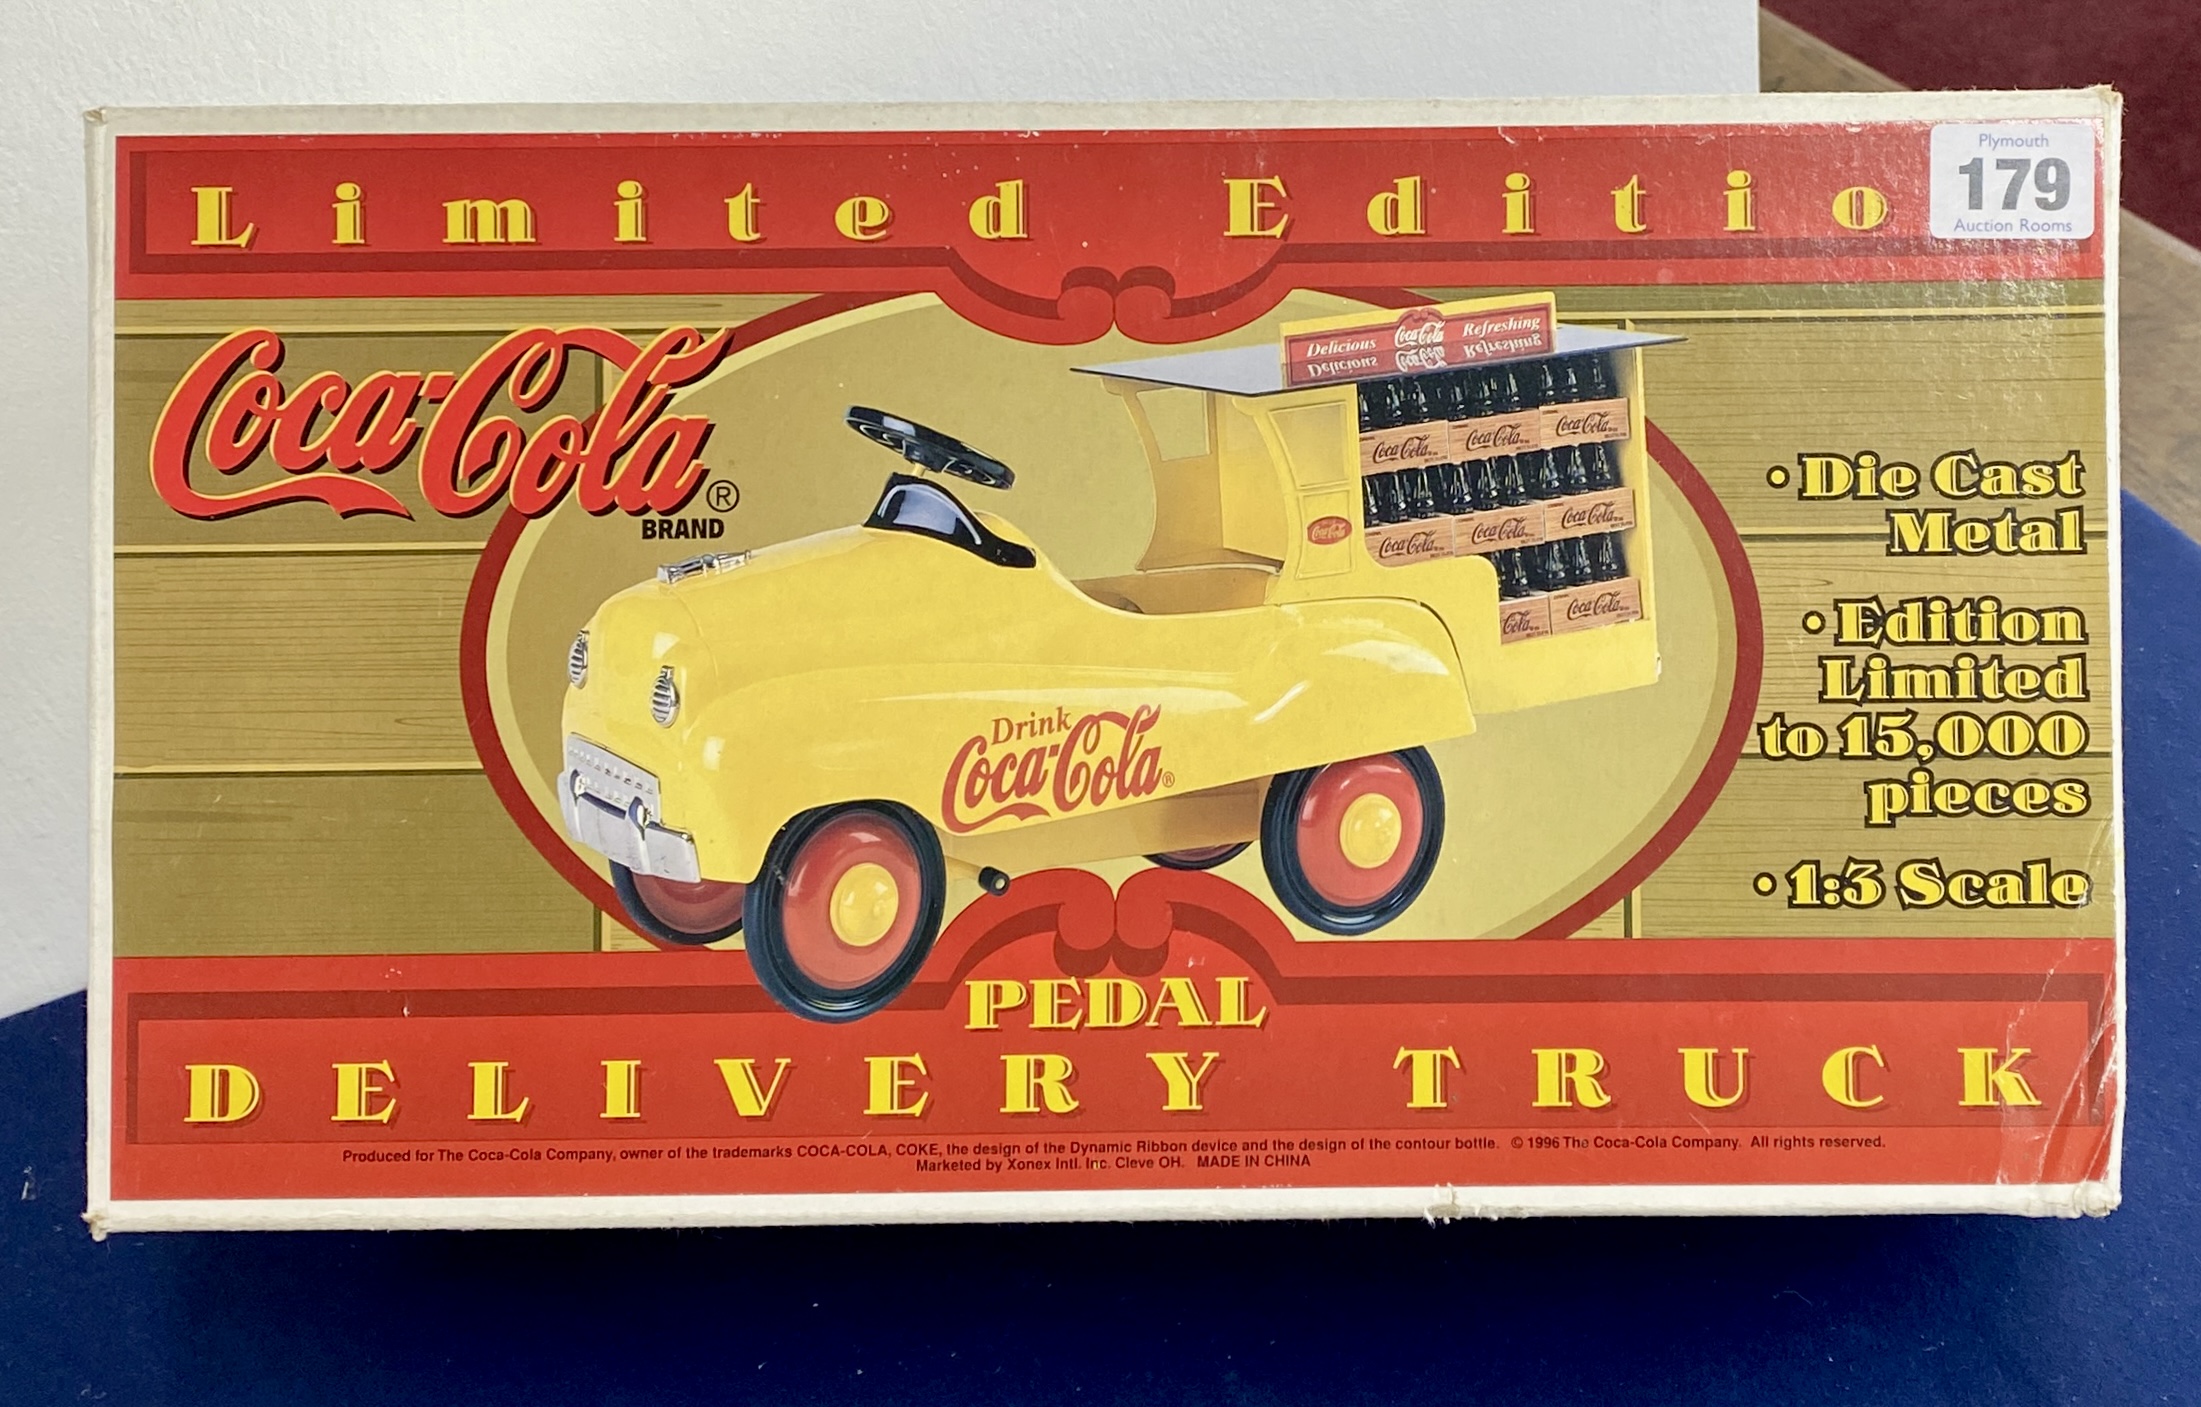 Coca-Cola Limited Edition pedal delivery truck. Diecast metal model, edition limited to 15,000 - Image 2 of 2